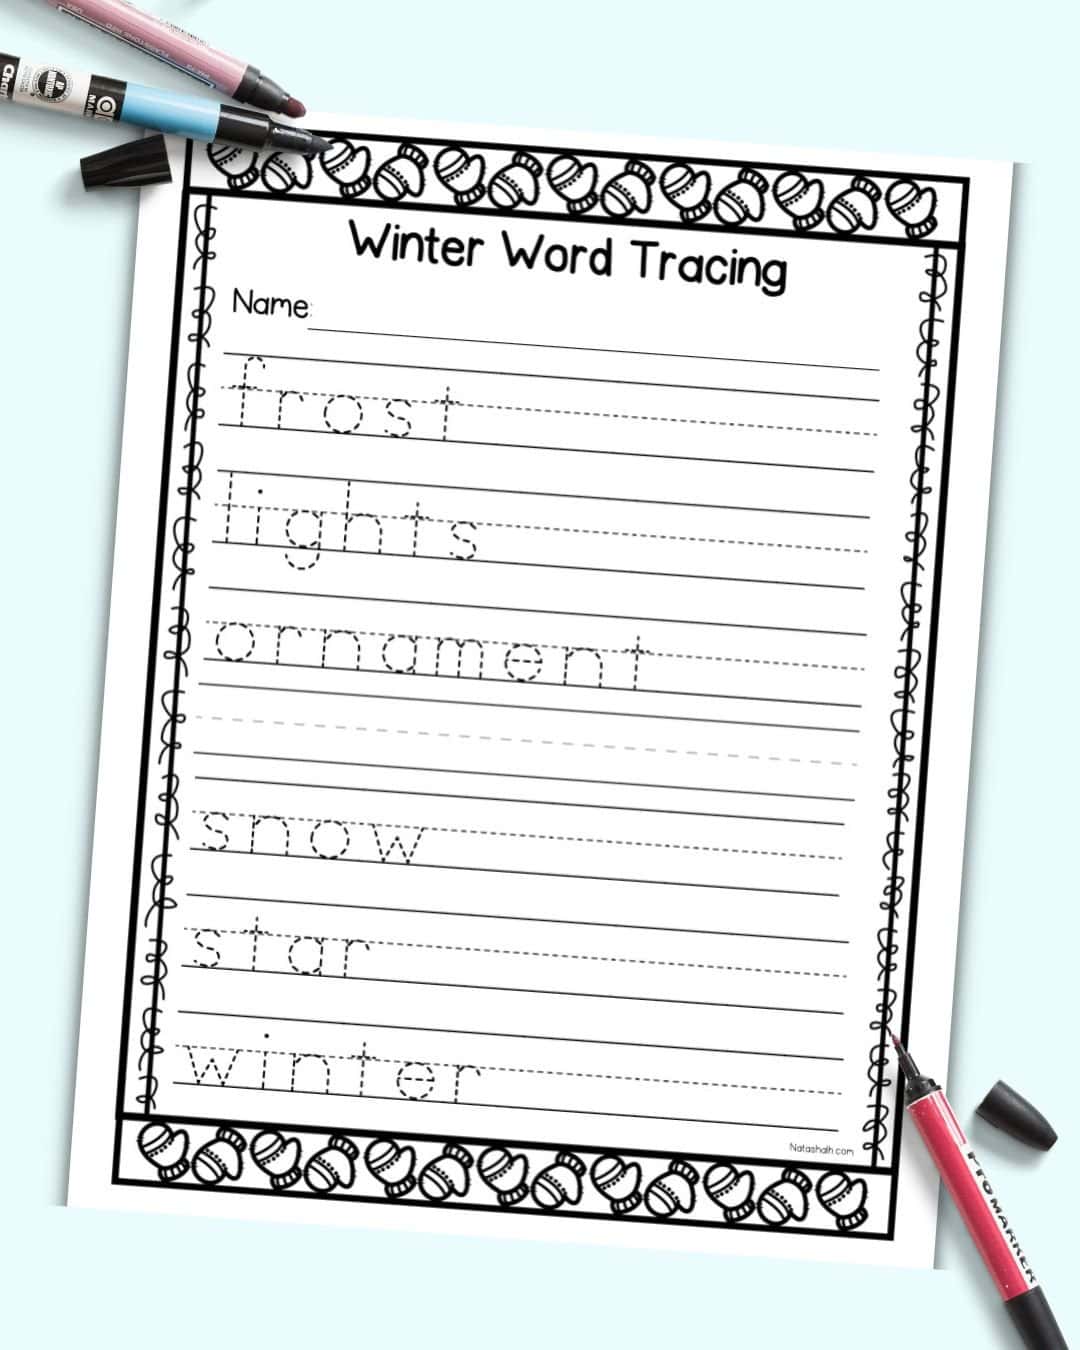 An image of a winter word trying worksheet for kindergarten and first grade with six winter themed words to trace